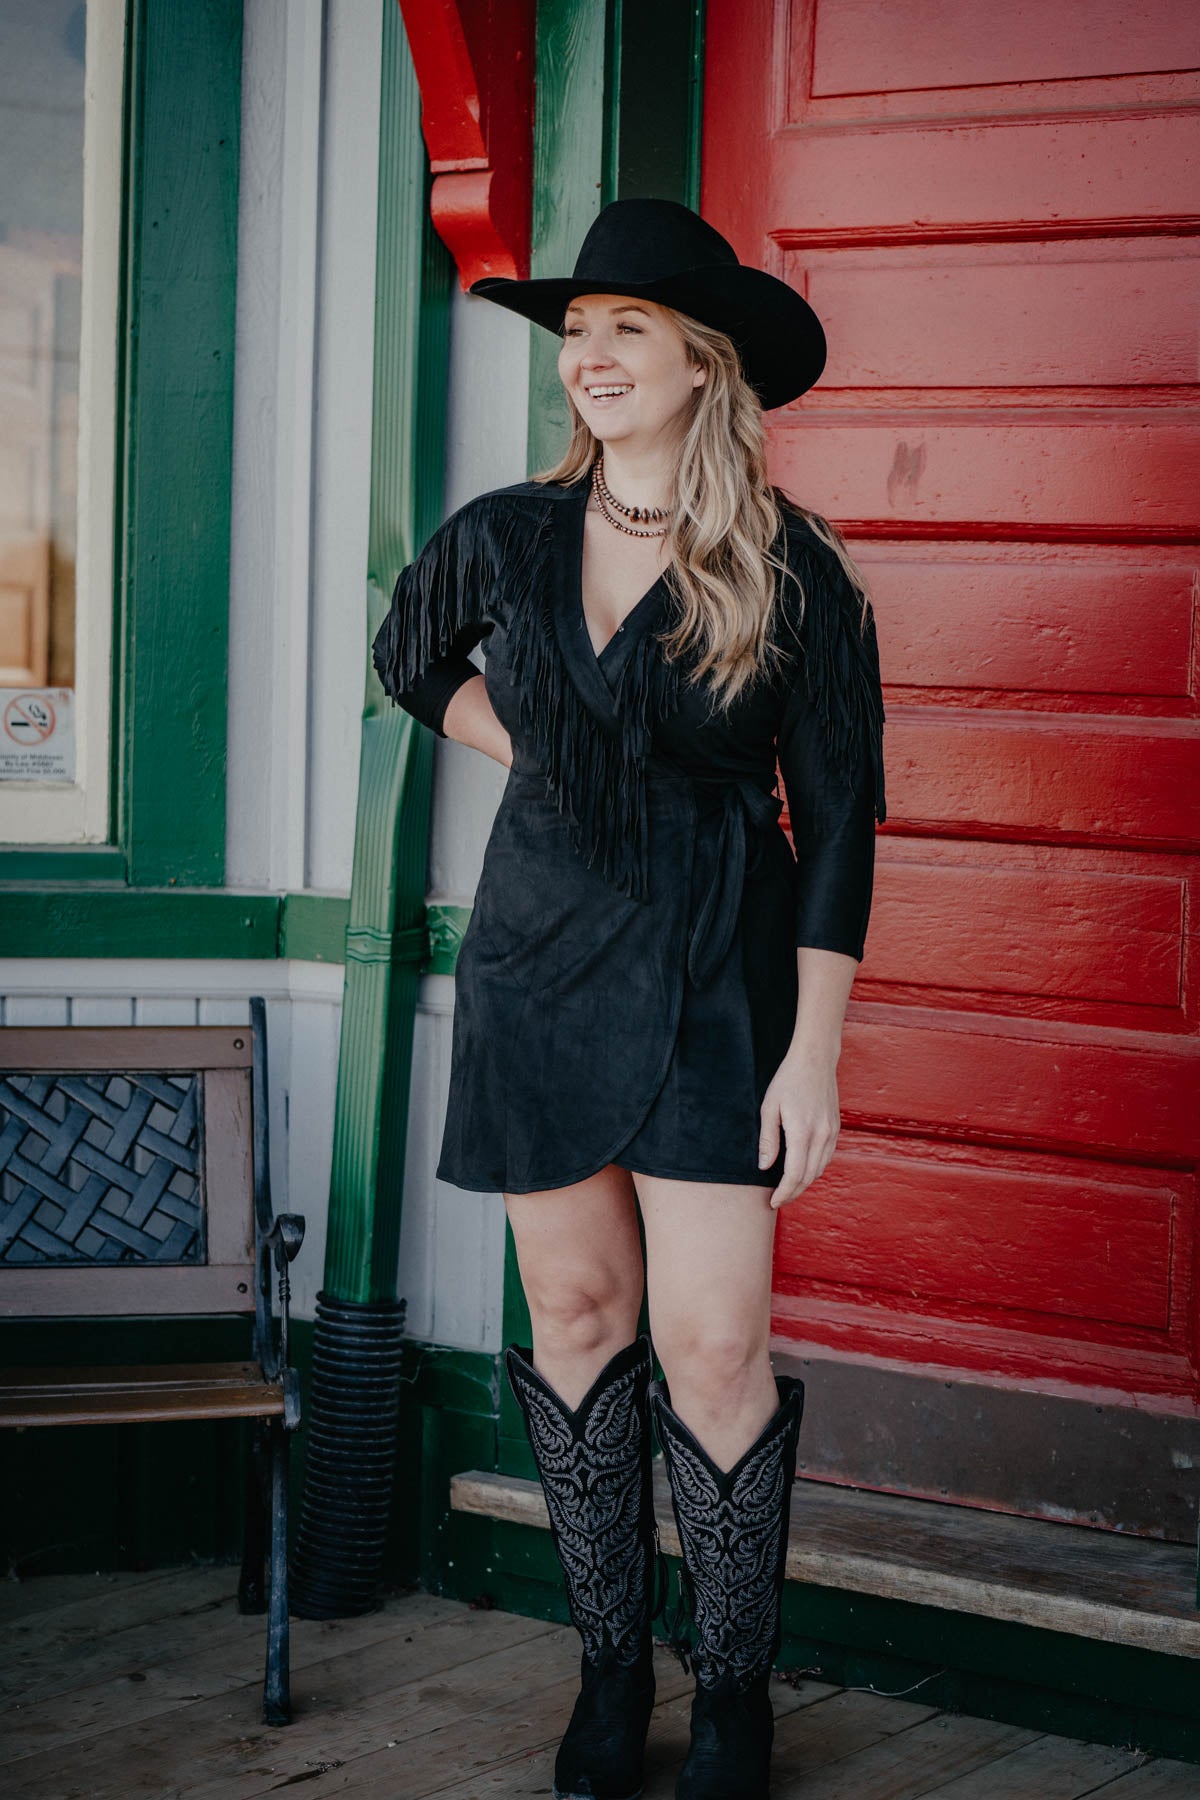 'Black Hills' Microsuede Wrap Dress by Ariat (Sizes 2-10)